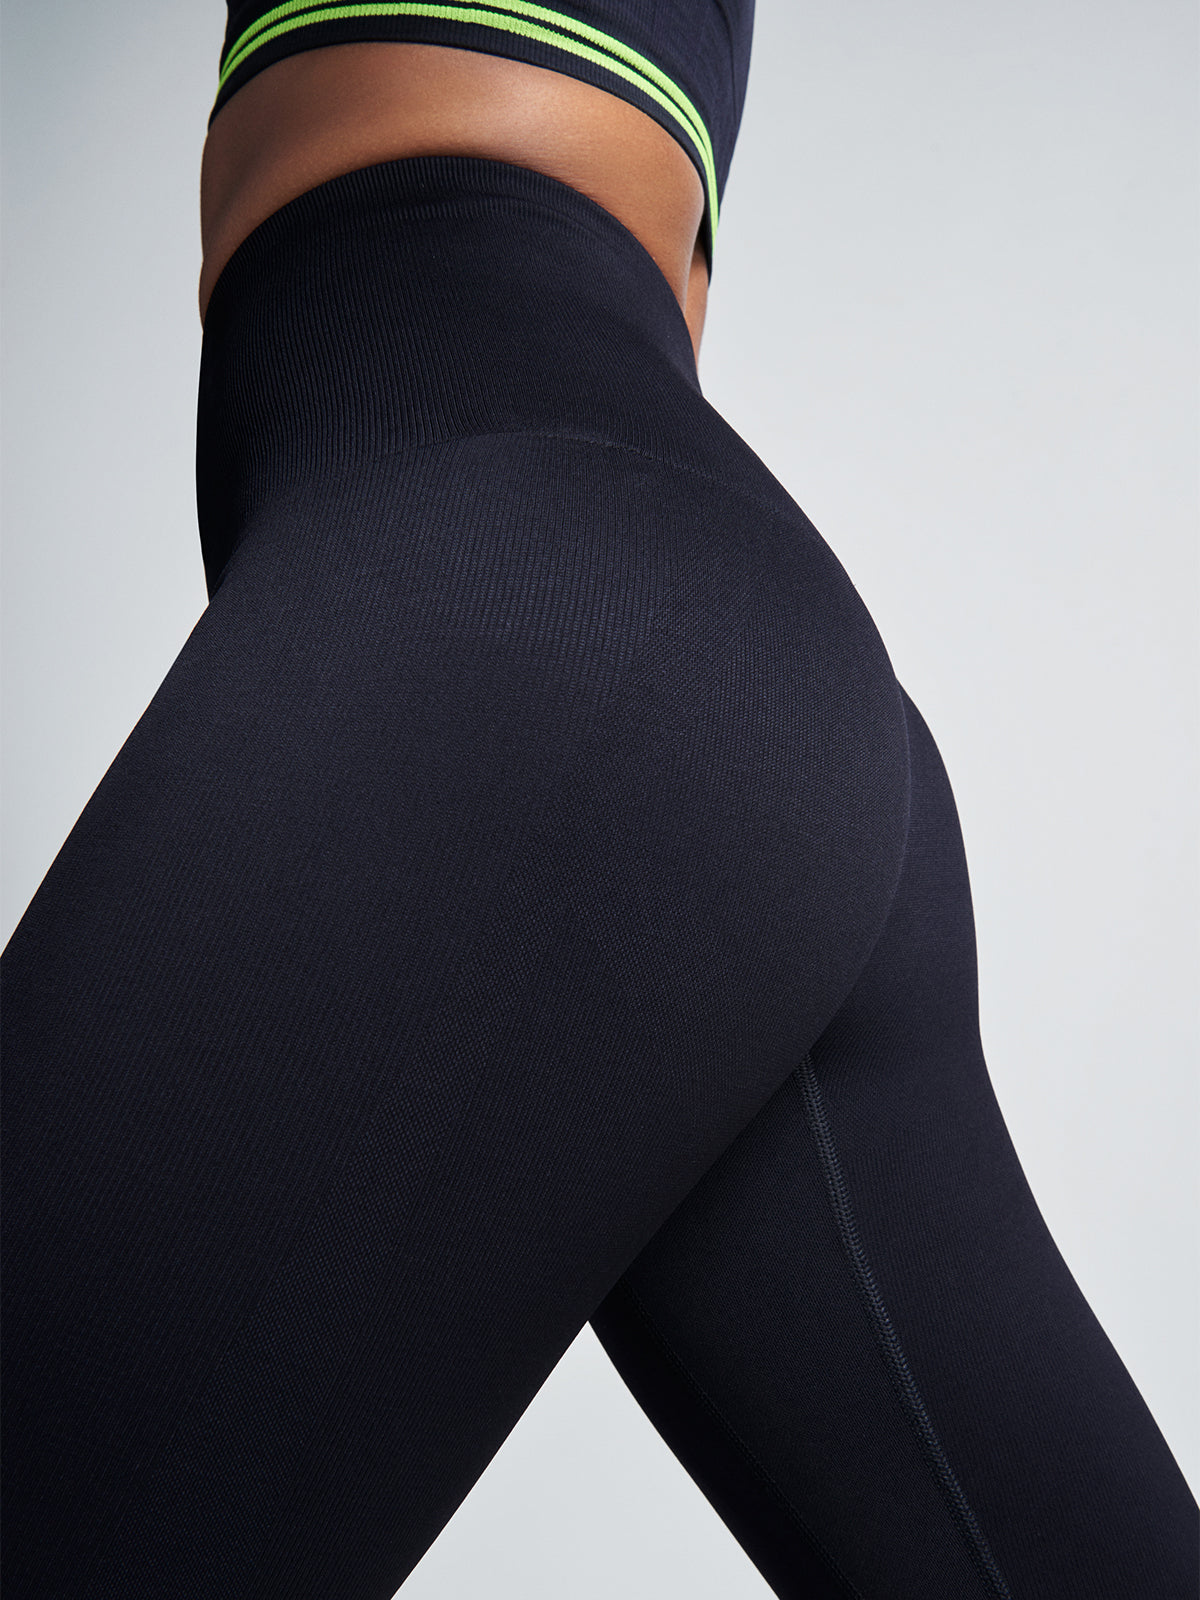 Has anyone ran in LNDR leggings? Would you recommend for long distances? :  r/running